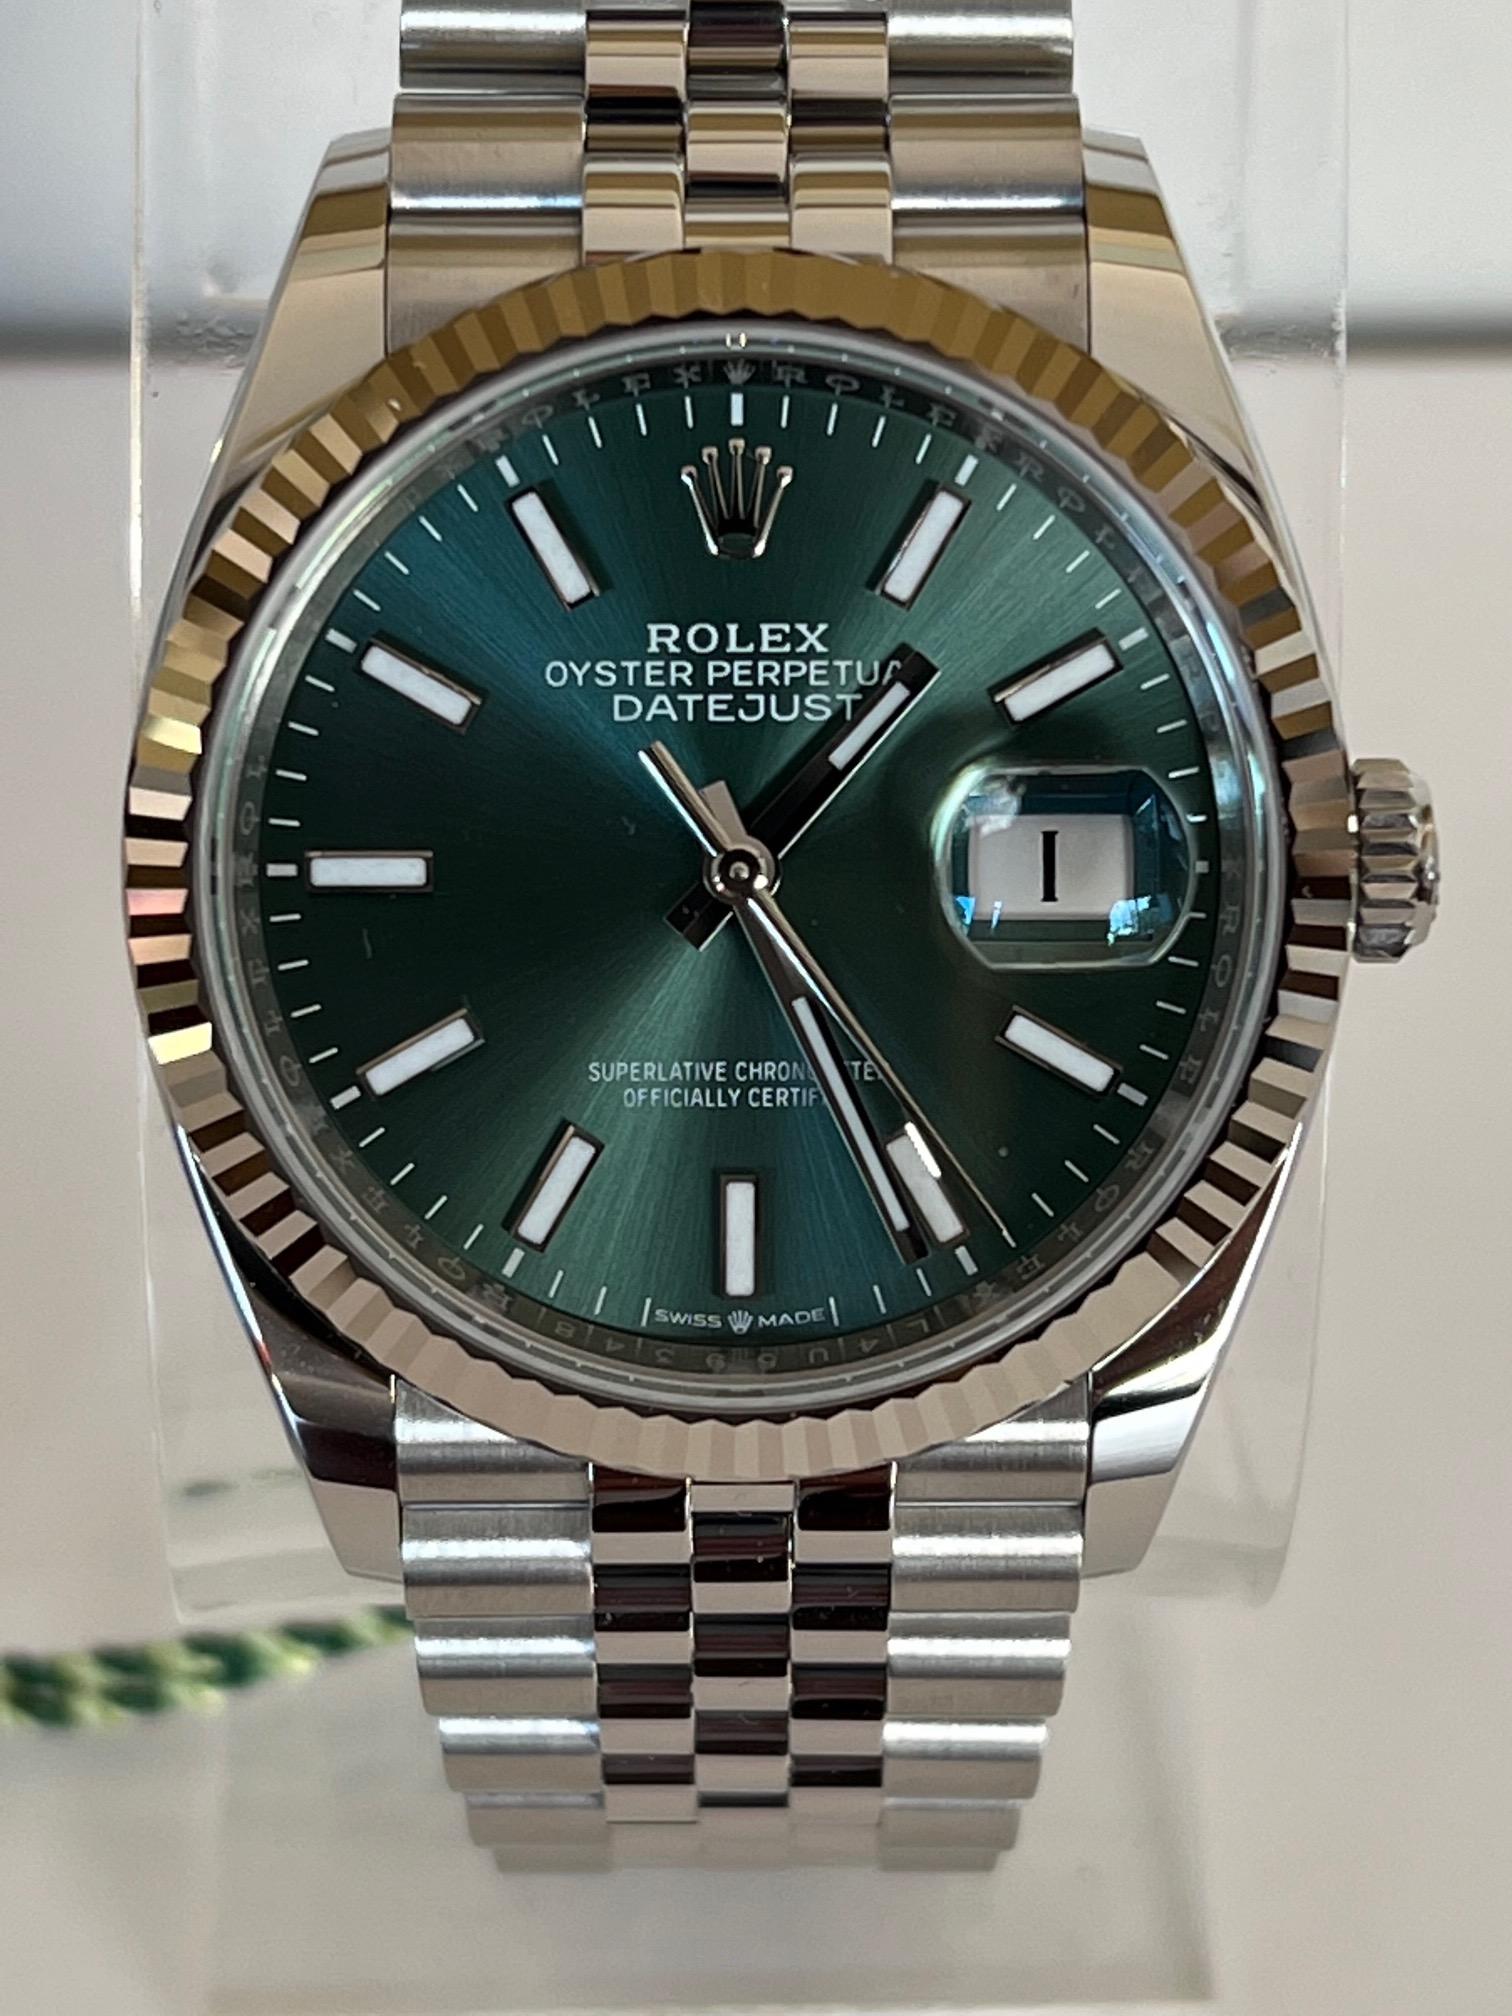 Brand: Rolex
Model Name: DateJust
Movement: Automatic
Case size: 36 mm
Case Back: Closed
Case Material: Stainless Steel
Bezel: 18k White Gold - Fluted Bezel
Dial: Mint Green
Bracelet: Stainless Steel - Jubilee Link
Hour Markers: Stick
Features: